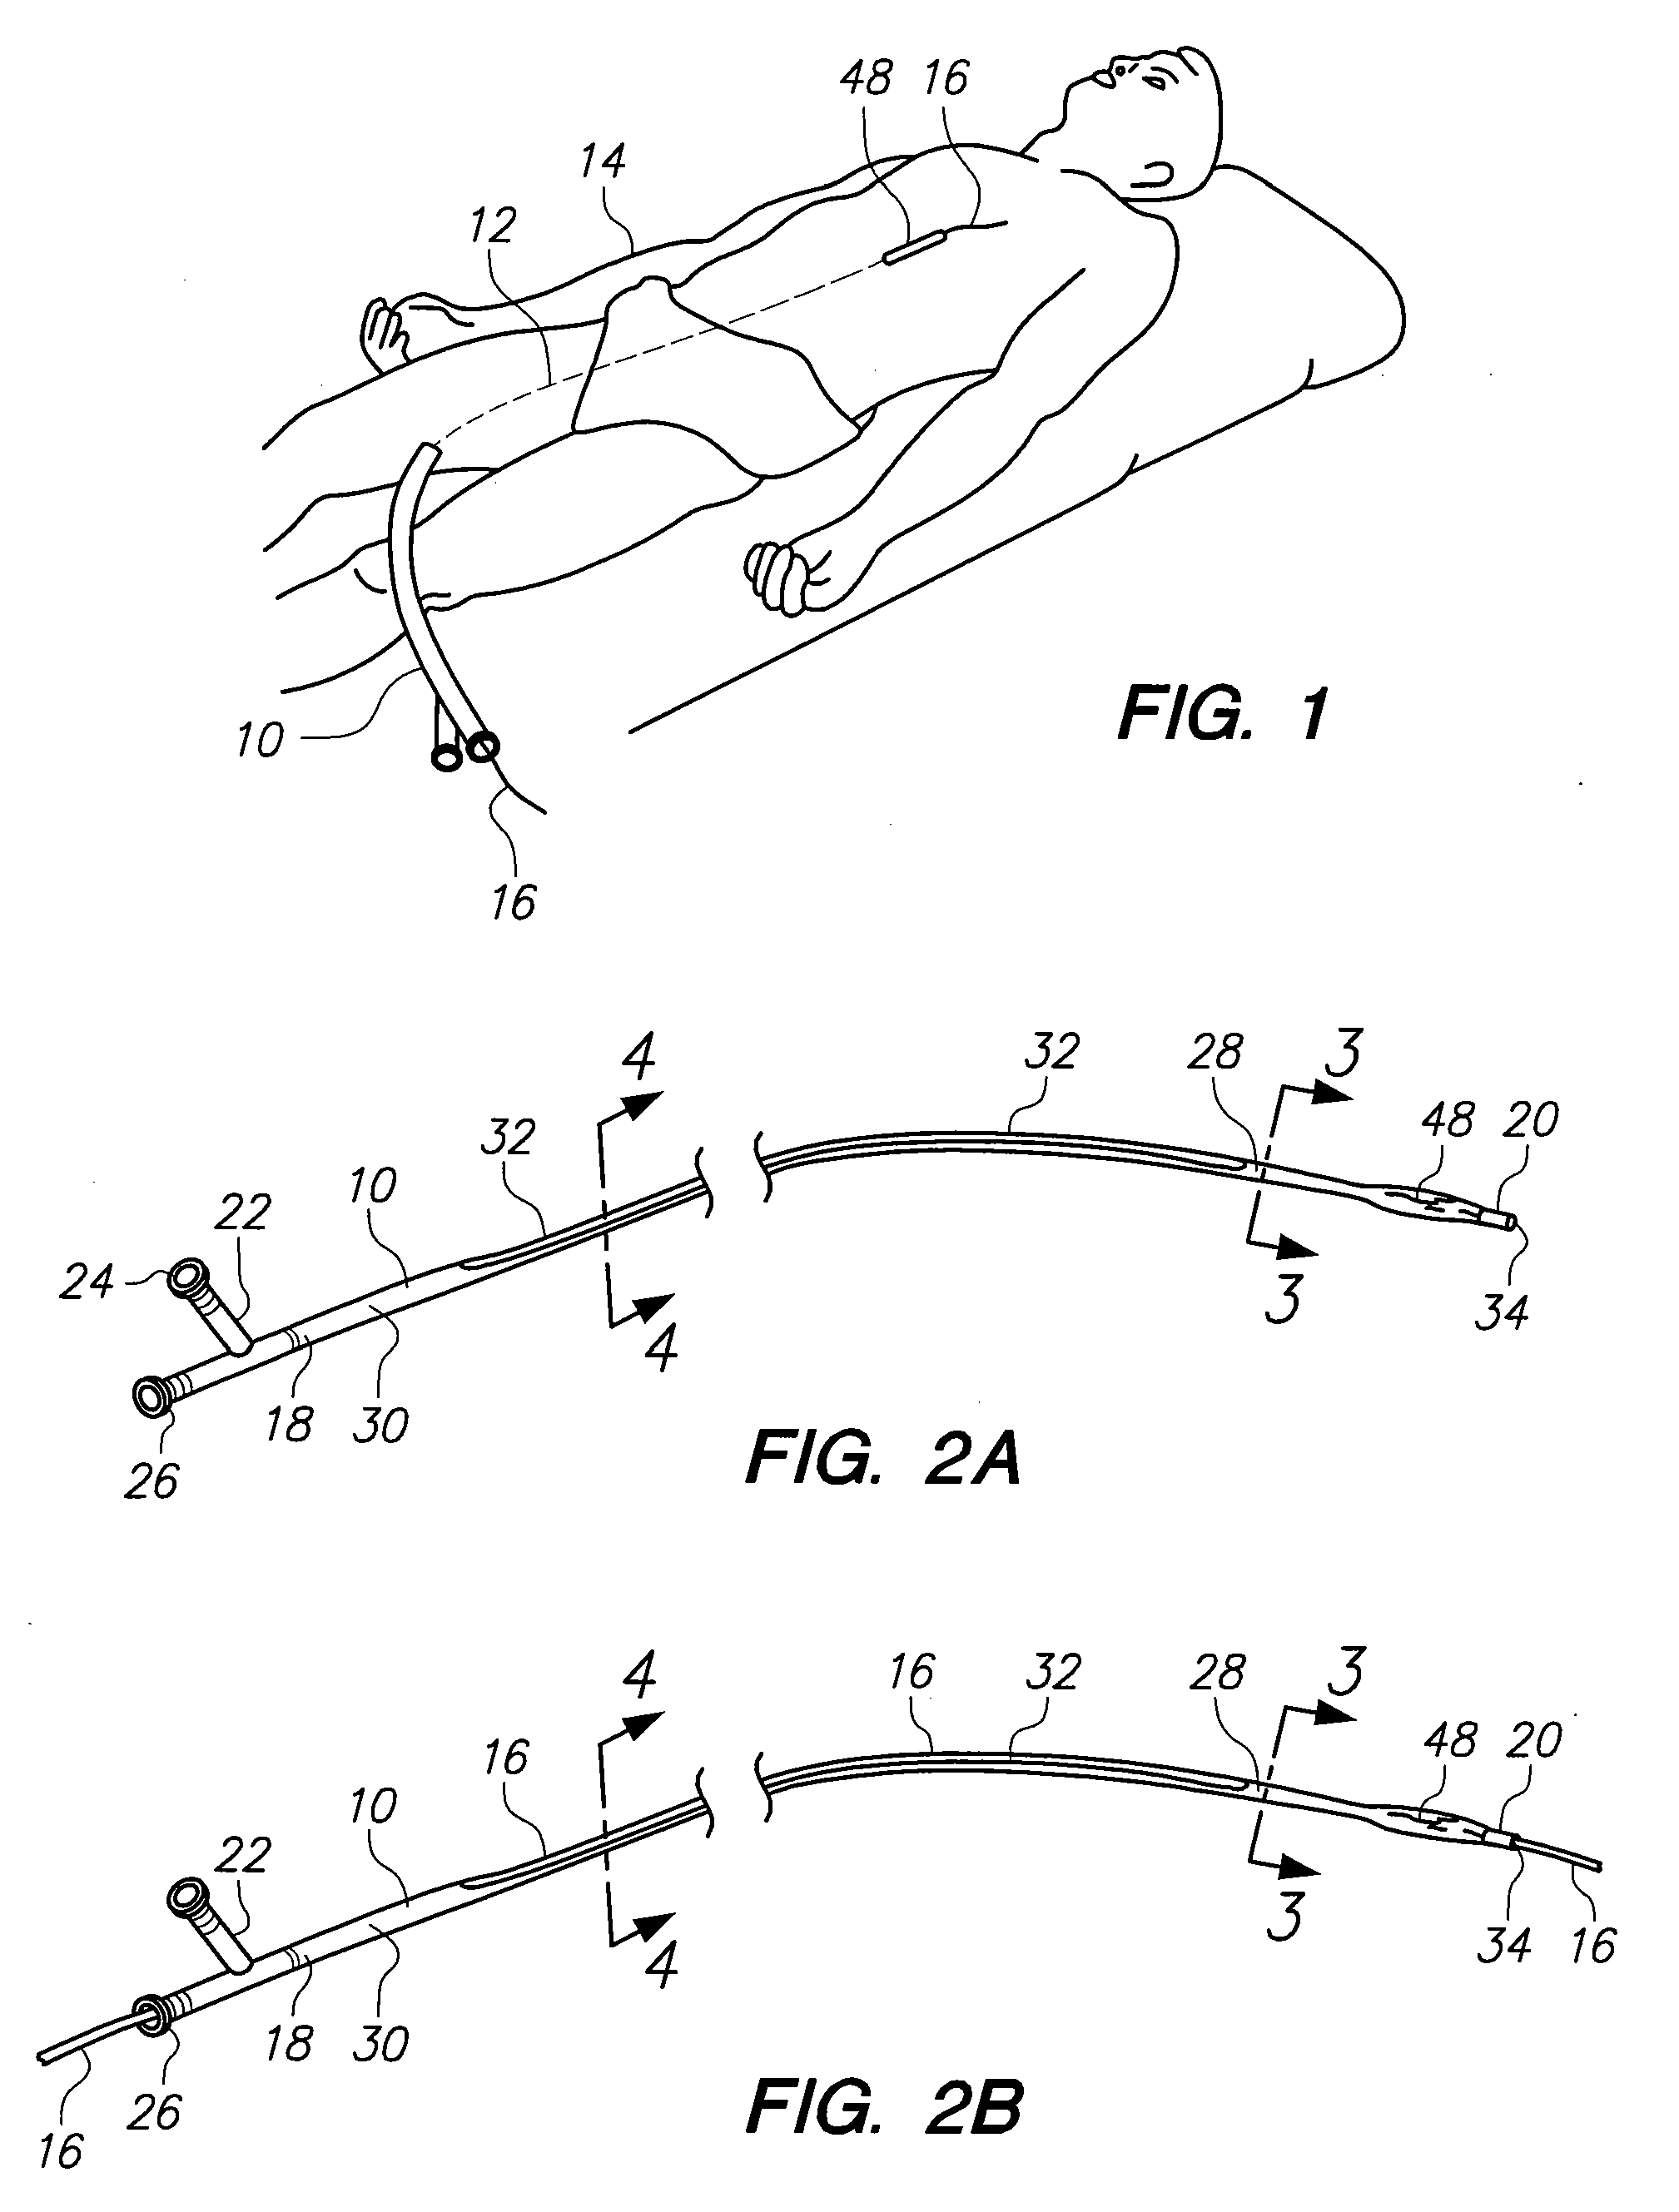 Over-the-wire catheter with lateral access